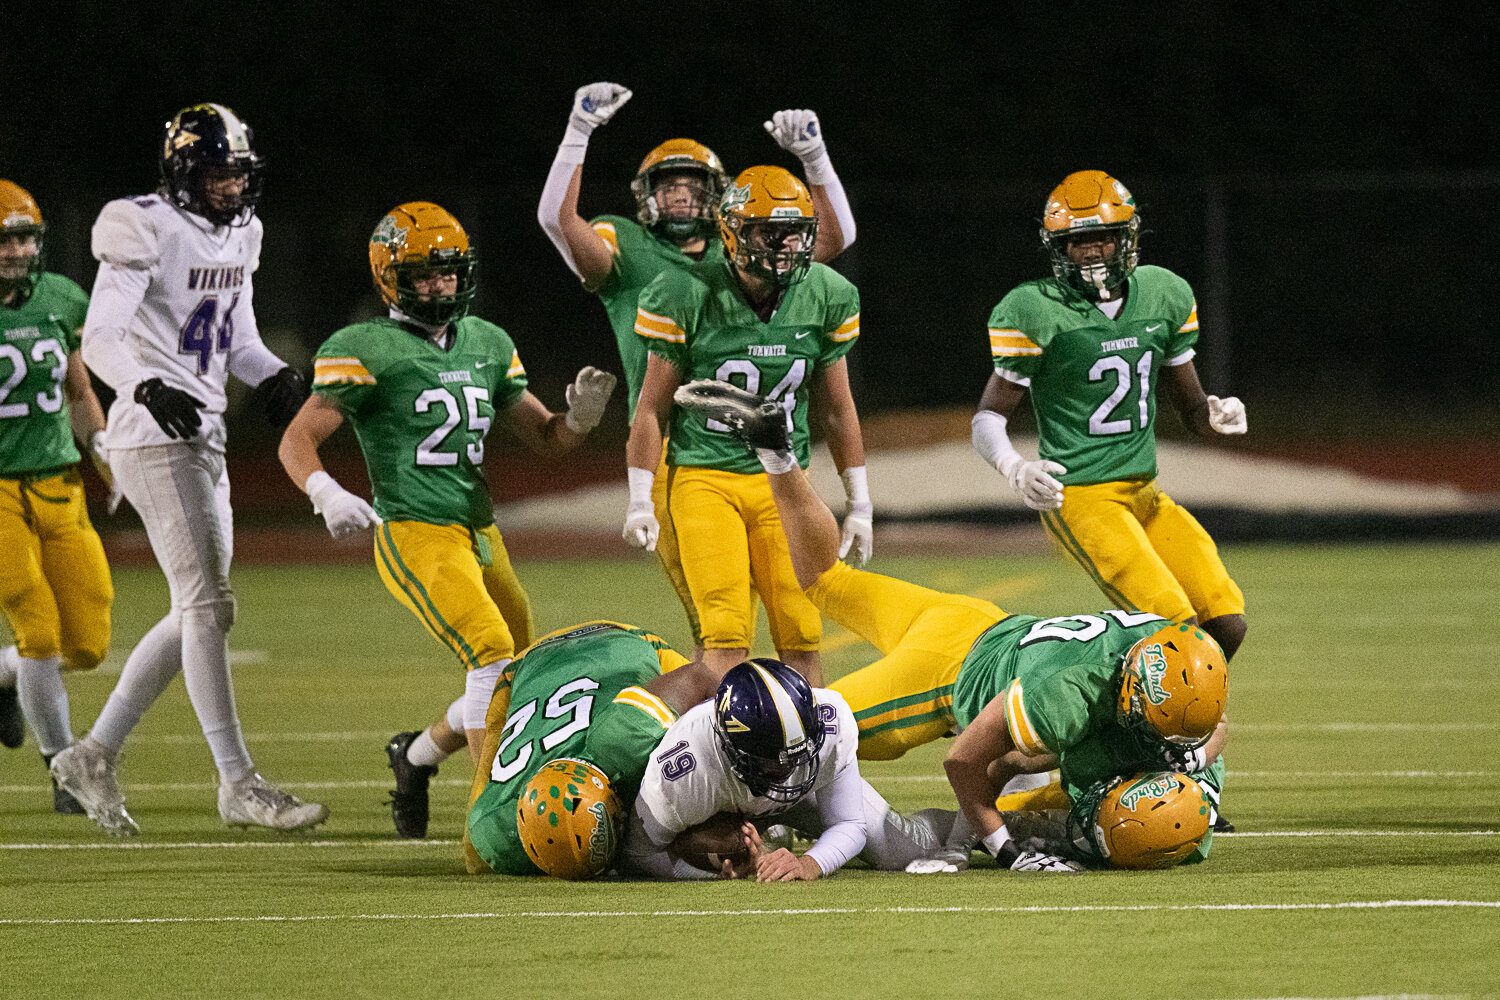 Tumwater defenders stop the North Kitsap ballcarrier well short on fourth down after a bad snap on a field goal attempt during the second half of the Thunderbirds' 19-17 win over North Kitsap in the 2A state semifinals on Nov. 25.